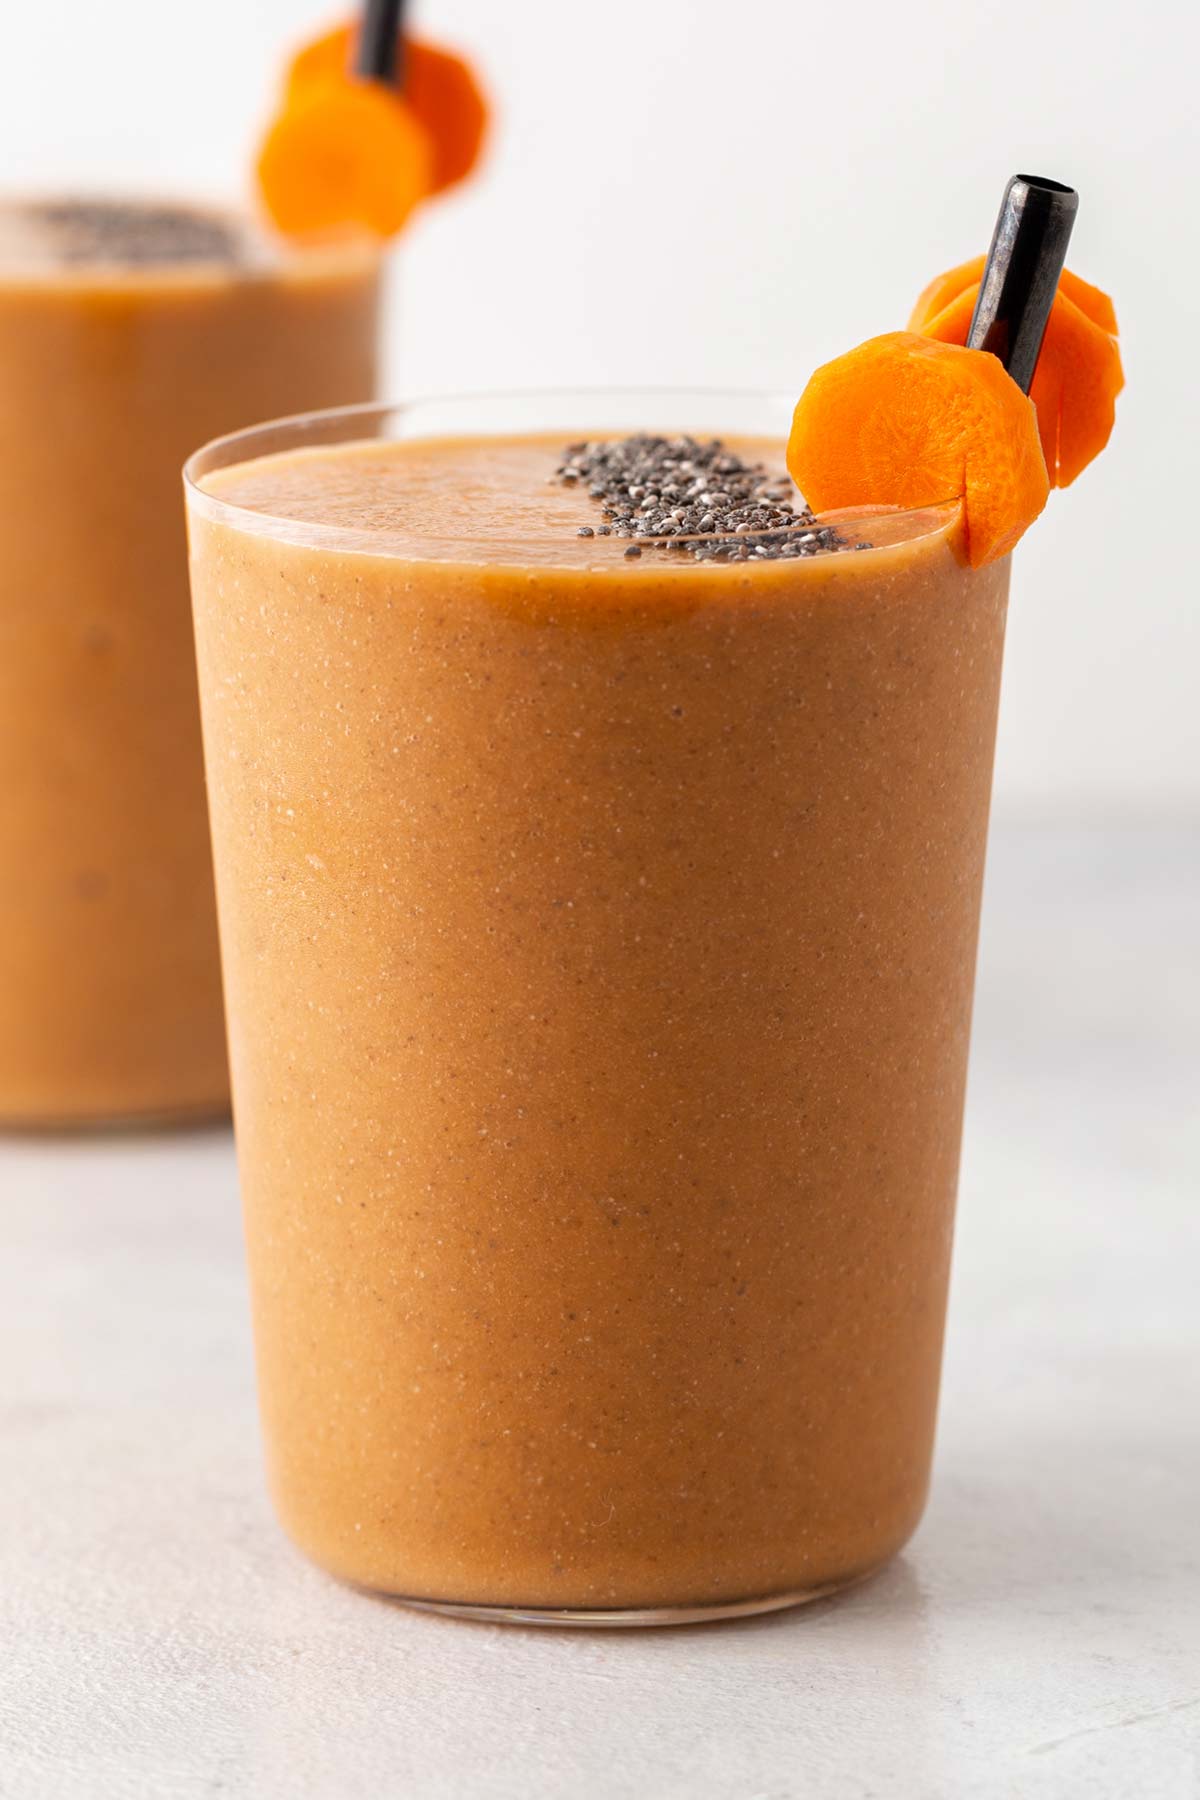 Carrot smoothie in a glass.